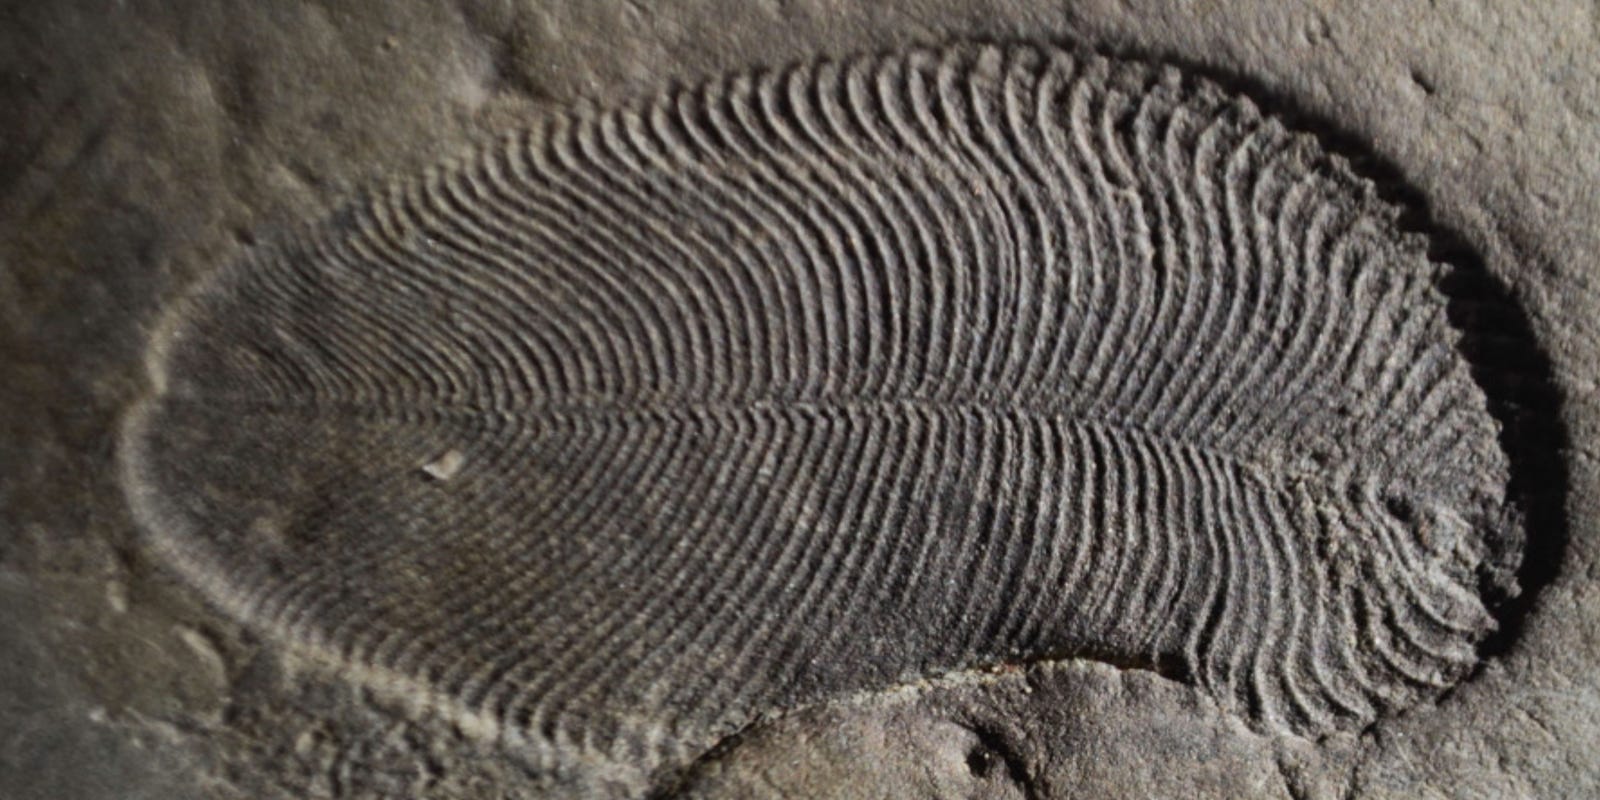 Oldest known animal fossil, Dickinsonia, revealed by scientists